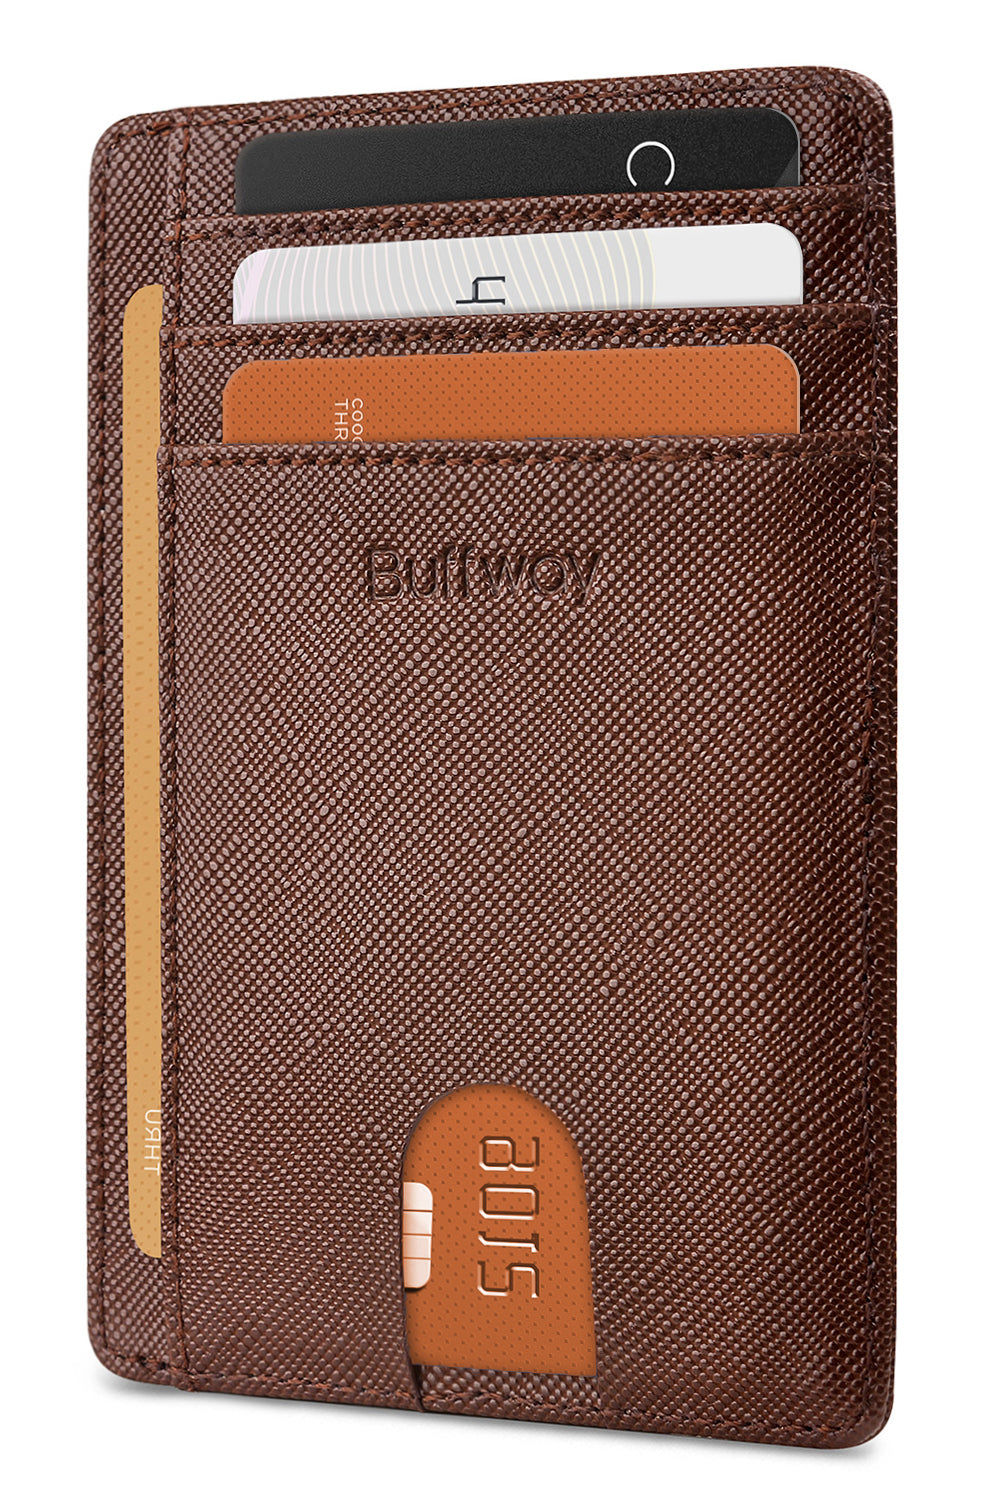 Buffway Slim Minimalist Front Pocket RFID Blocking Leather Wallets for Men and Women - Cross Coffee